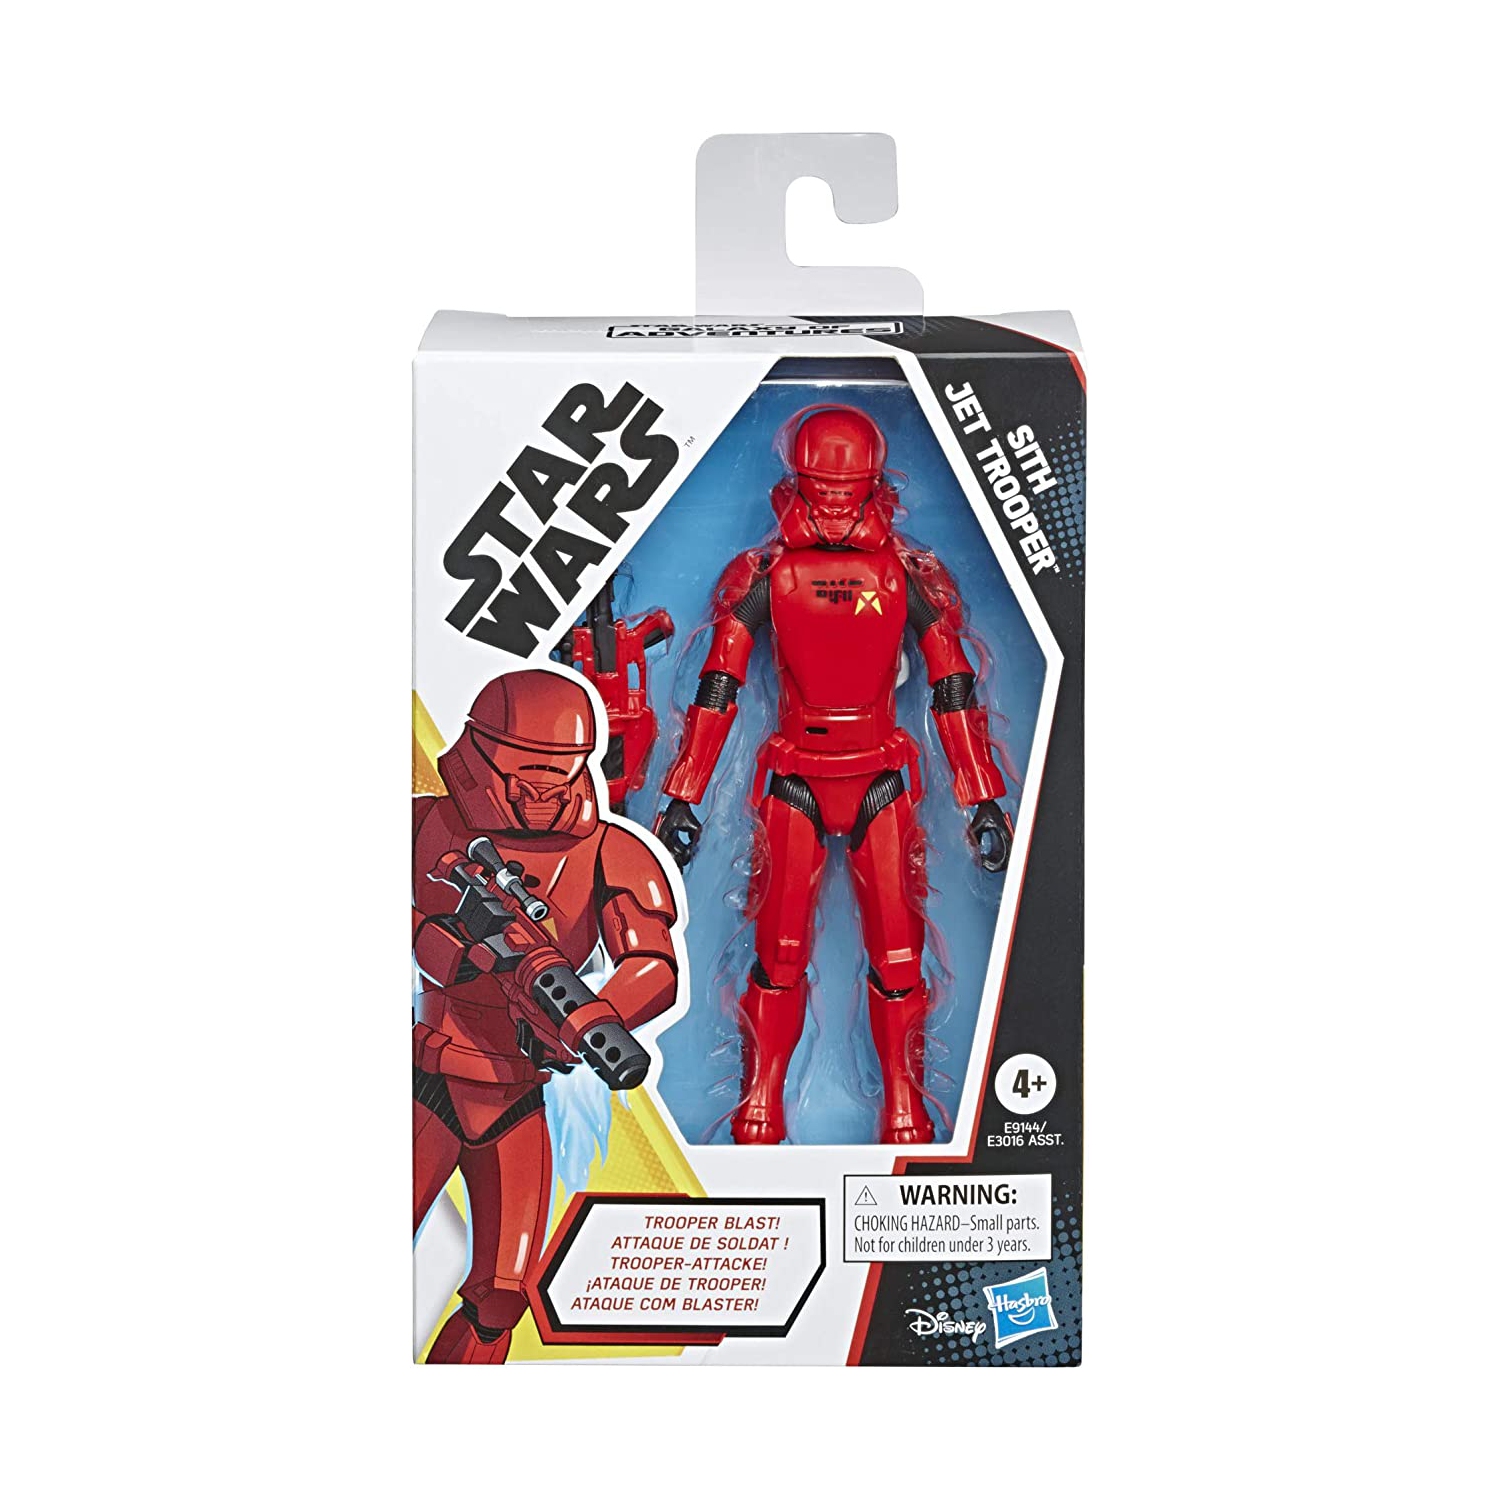 Star Wars Galaxy of Adventures Sith Jet Trooper 5-inch Scale Figure with Blaster Feature, Toys for Kids Ages 4 and Up